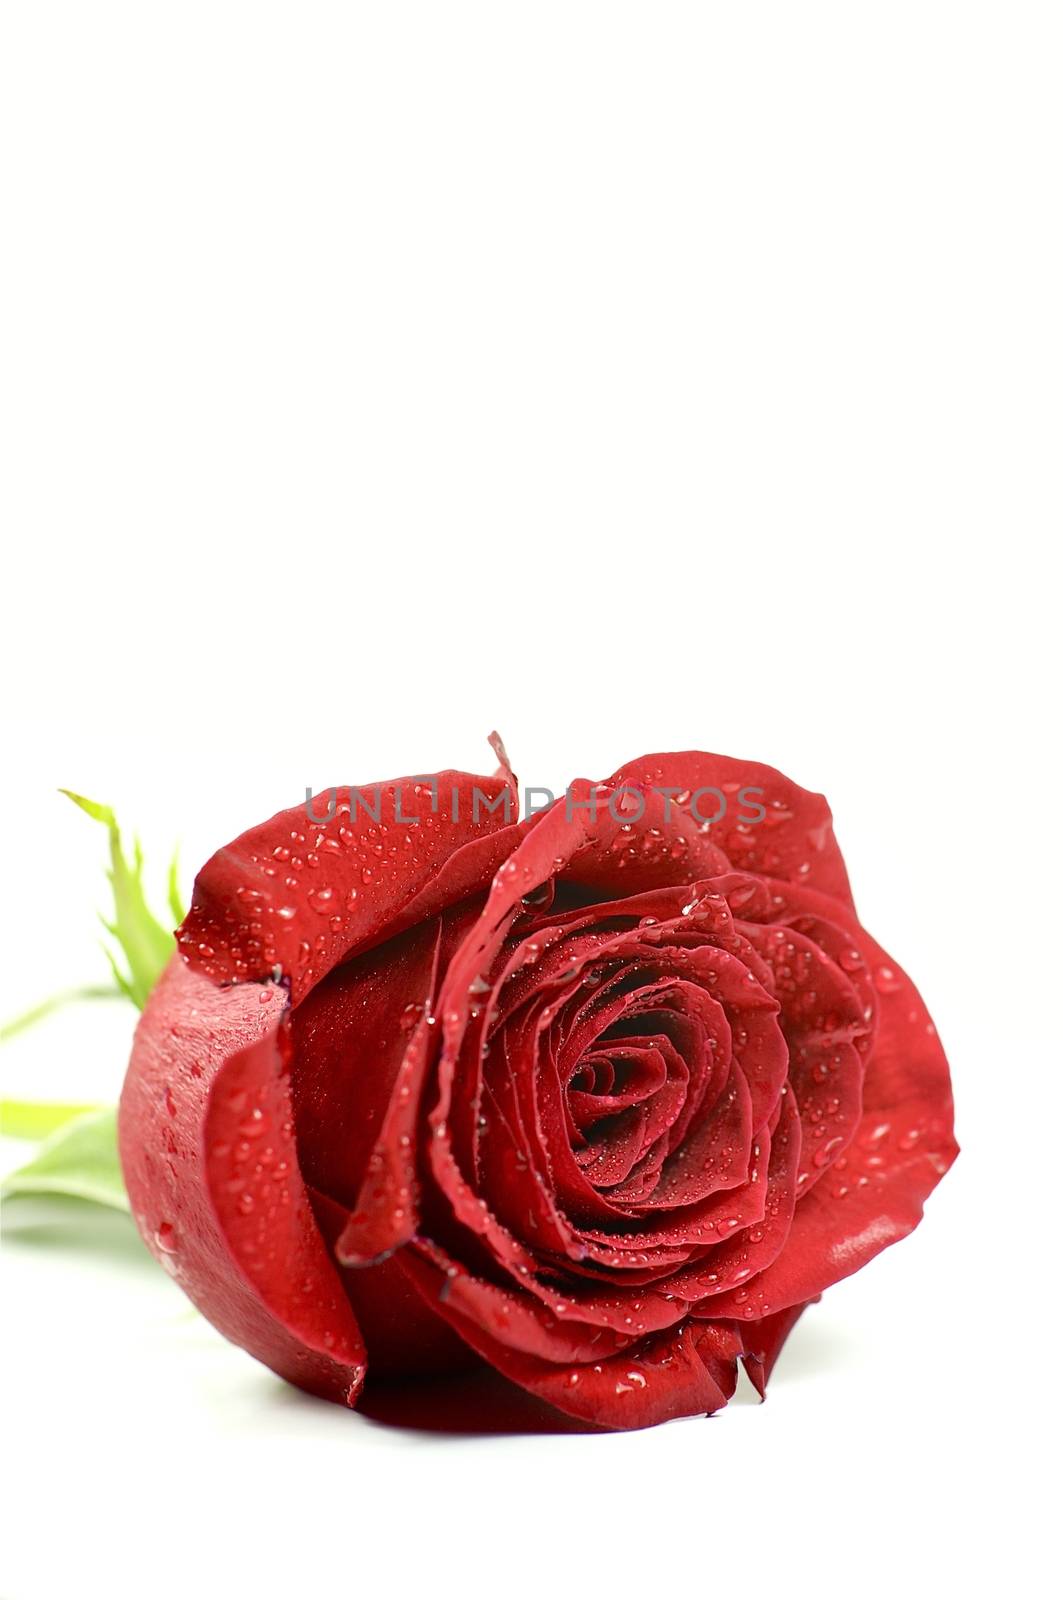 Single Red Rose. Separated. Vertical Photo